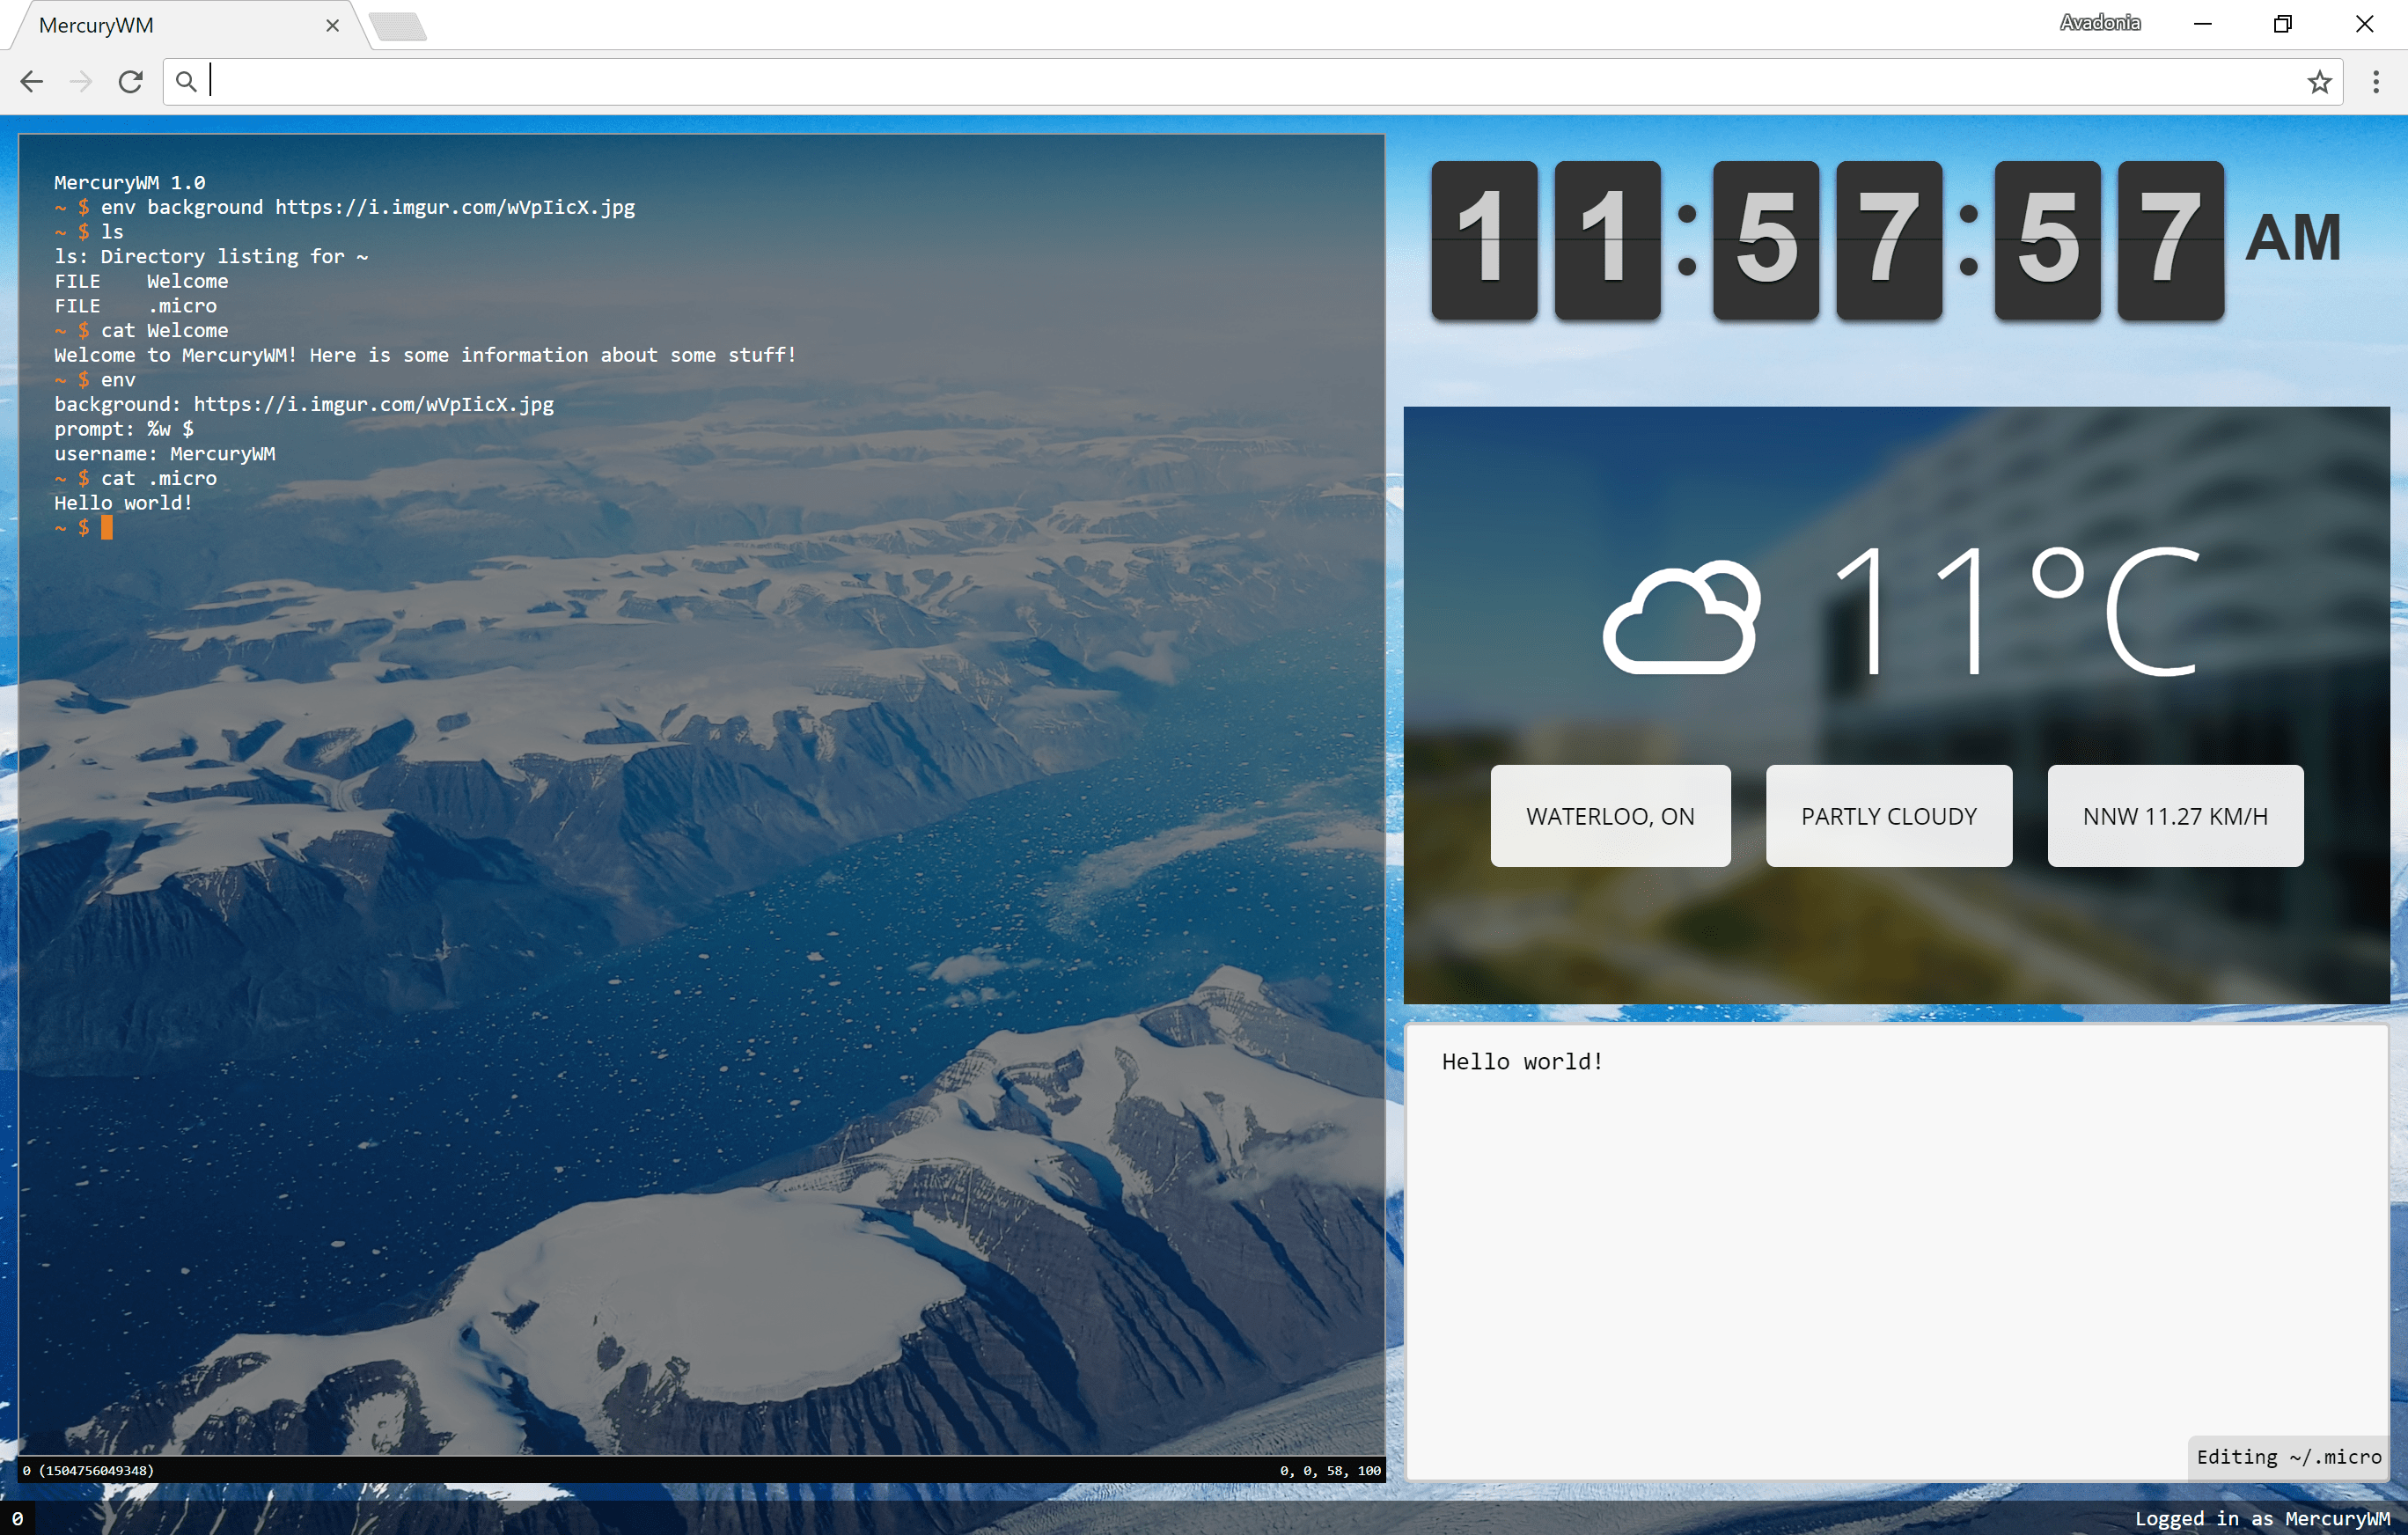 Layout with clock, weather, and todo scripts